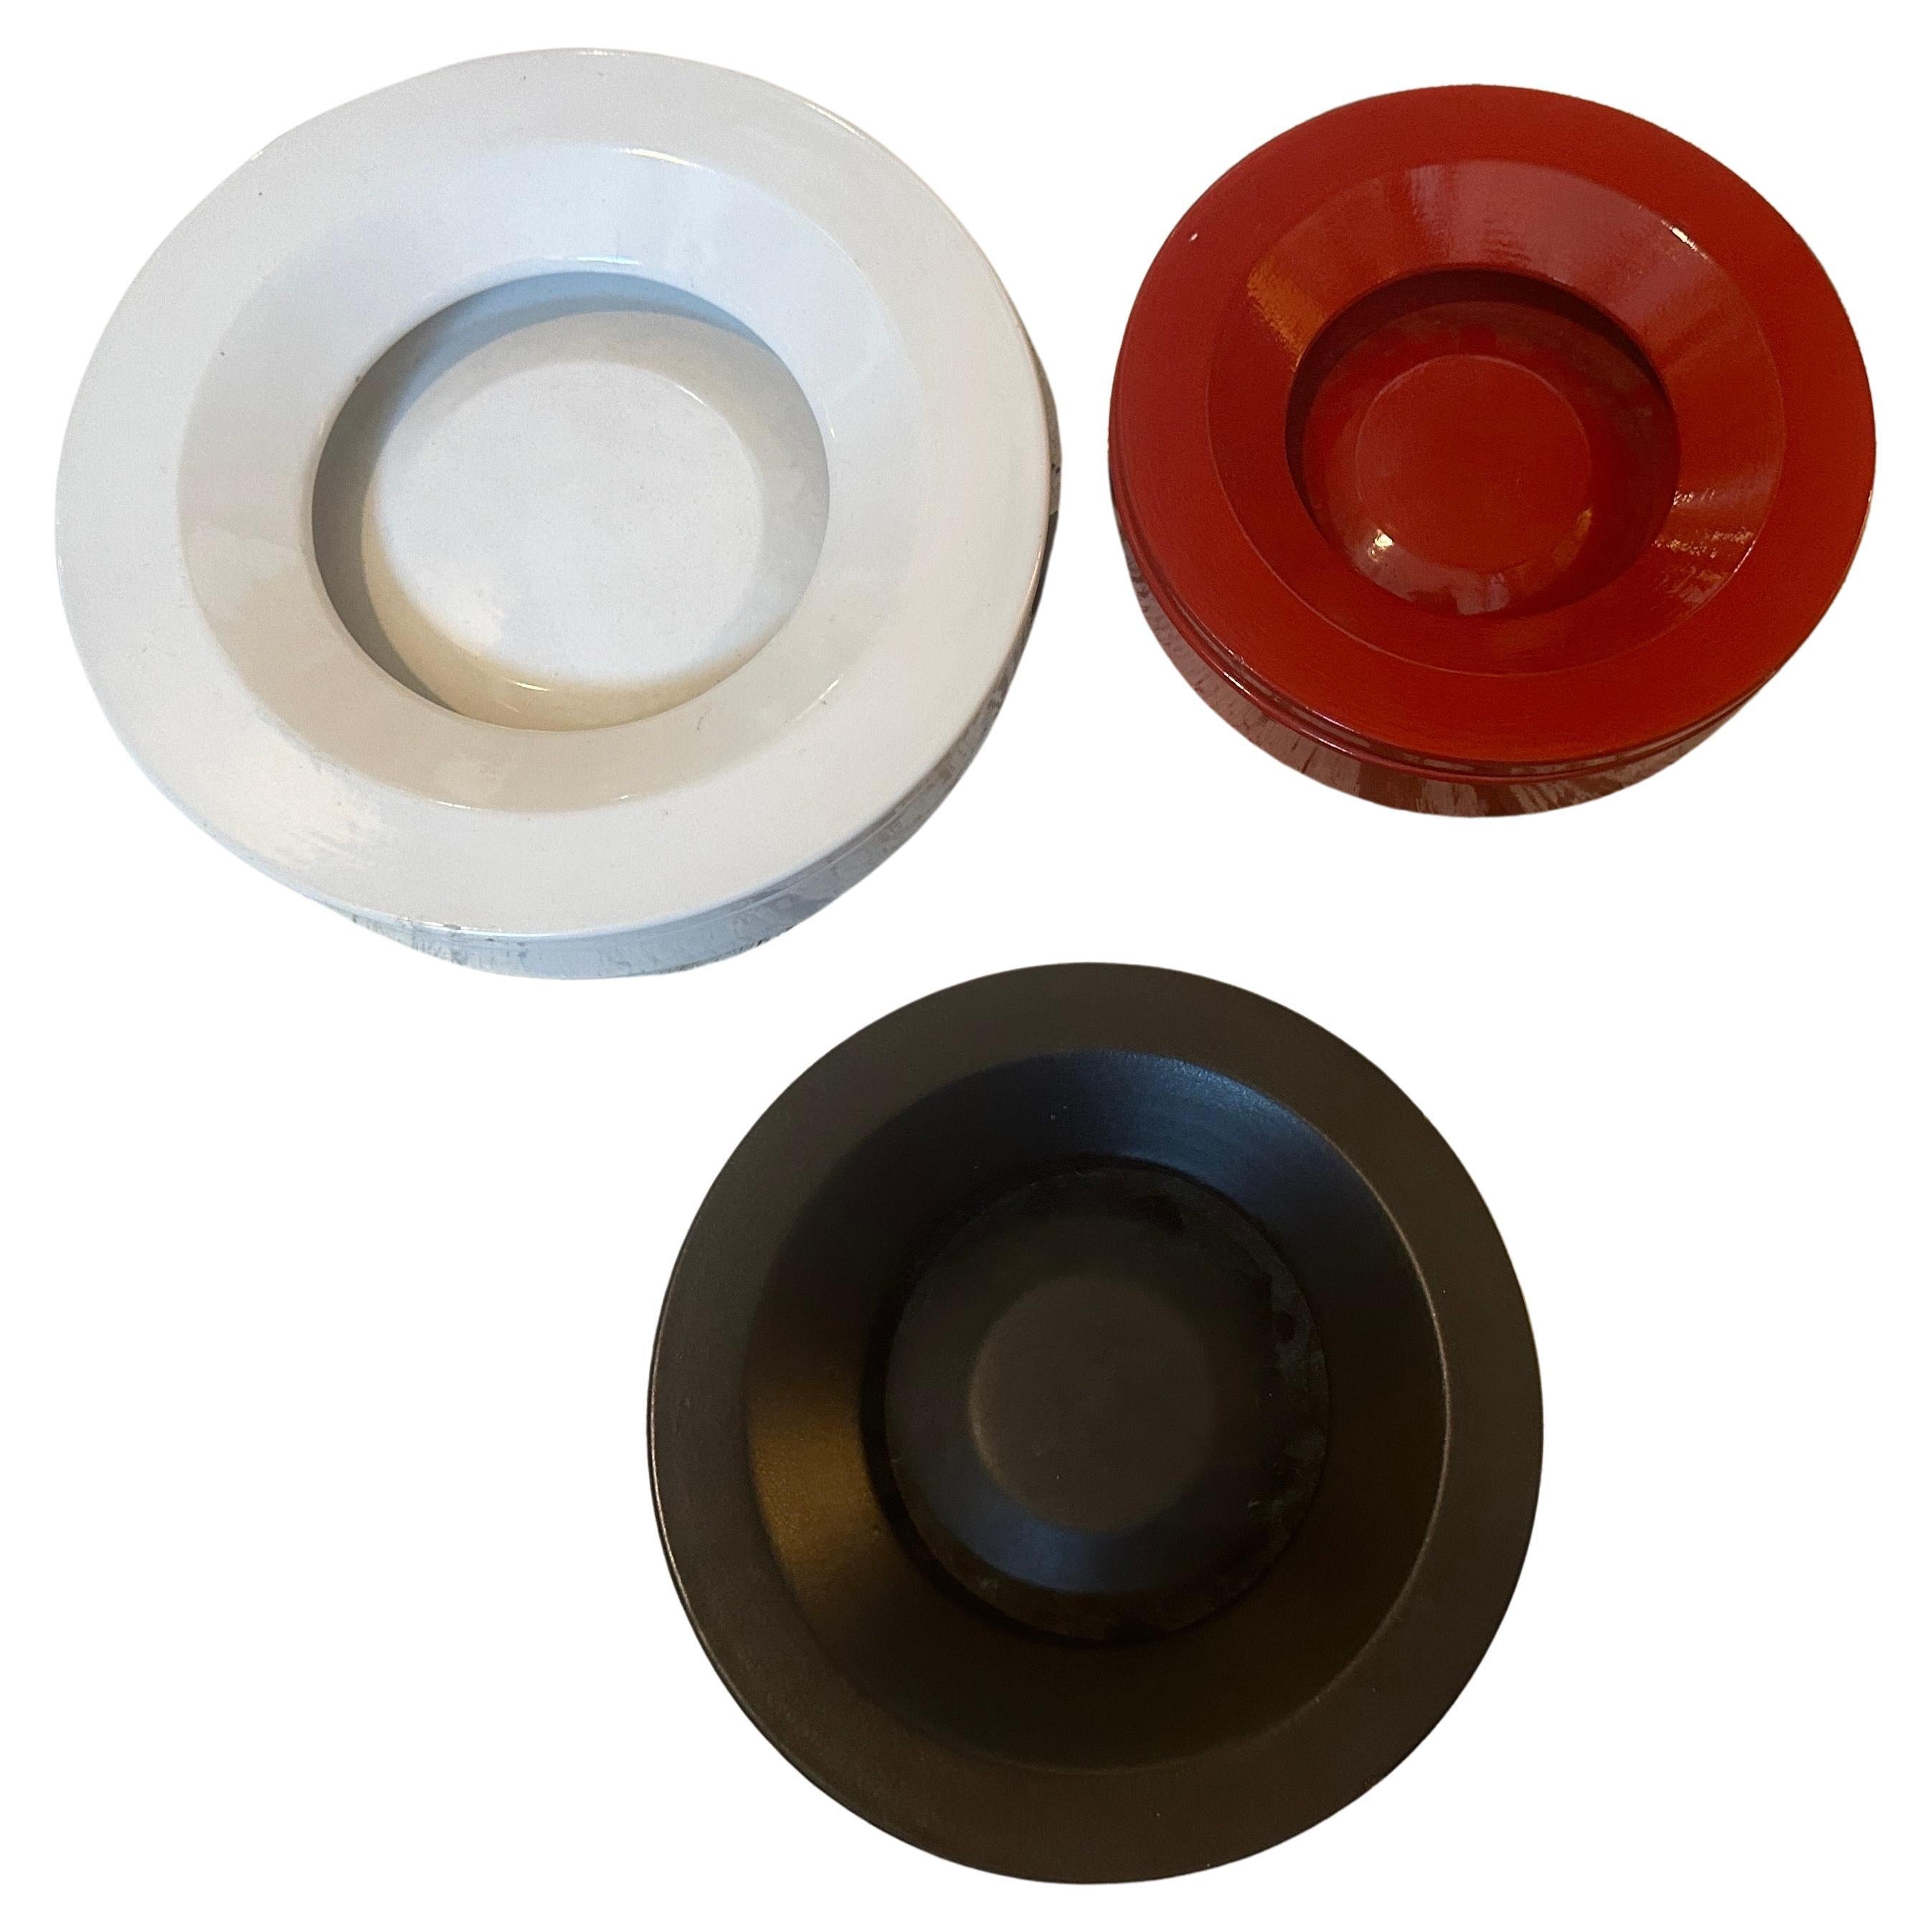 Three vintage ceramic ashtray designed by Angelo Mangiarotti and manufactured by Danese Milano in The Sixties. The three iconic ashtray have different colors, diameter of the white one is 25 cm, the red and the black one diameter id 20 cm. They are